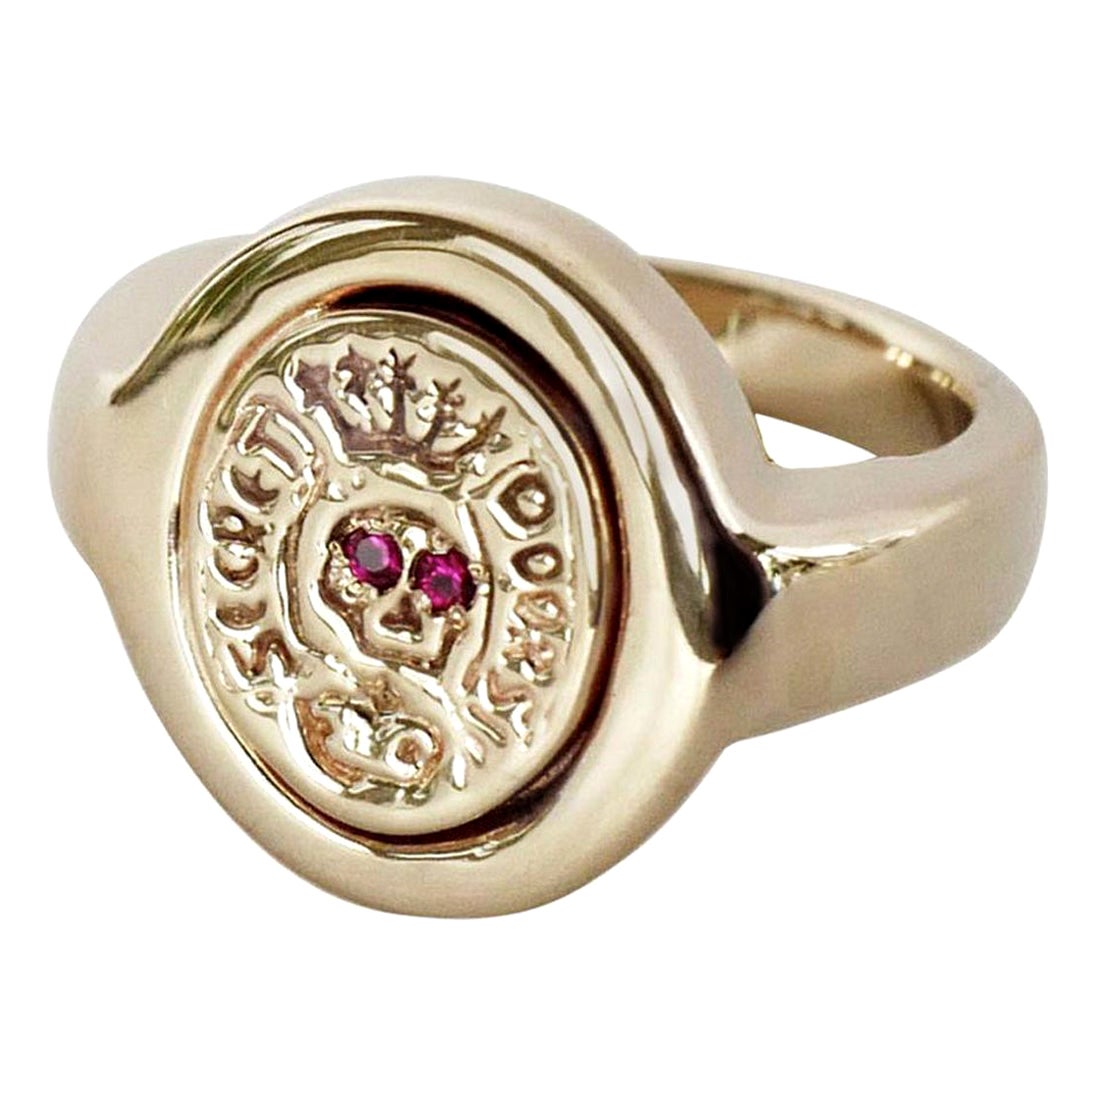 Ruby Crest Signet Ring Skull Yellow Gold Victorian Style 14k J Dauphin For Sale